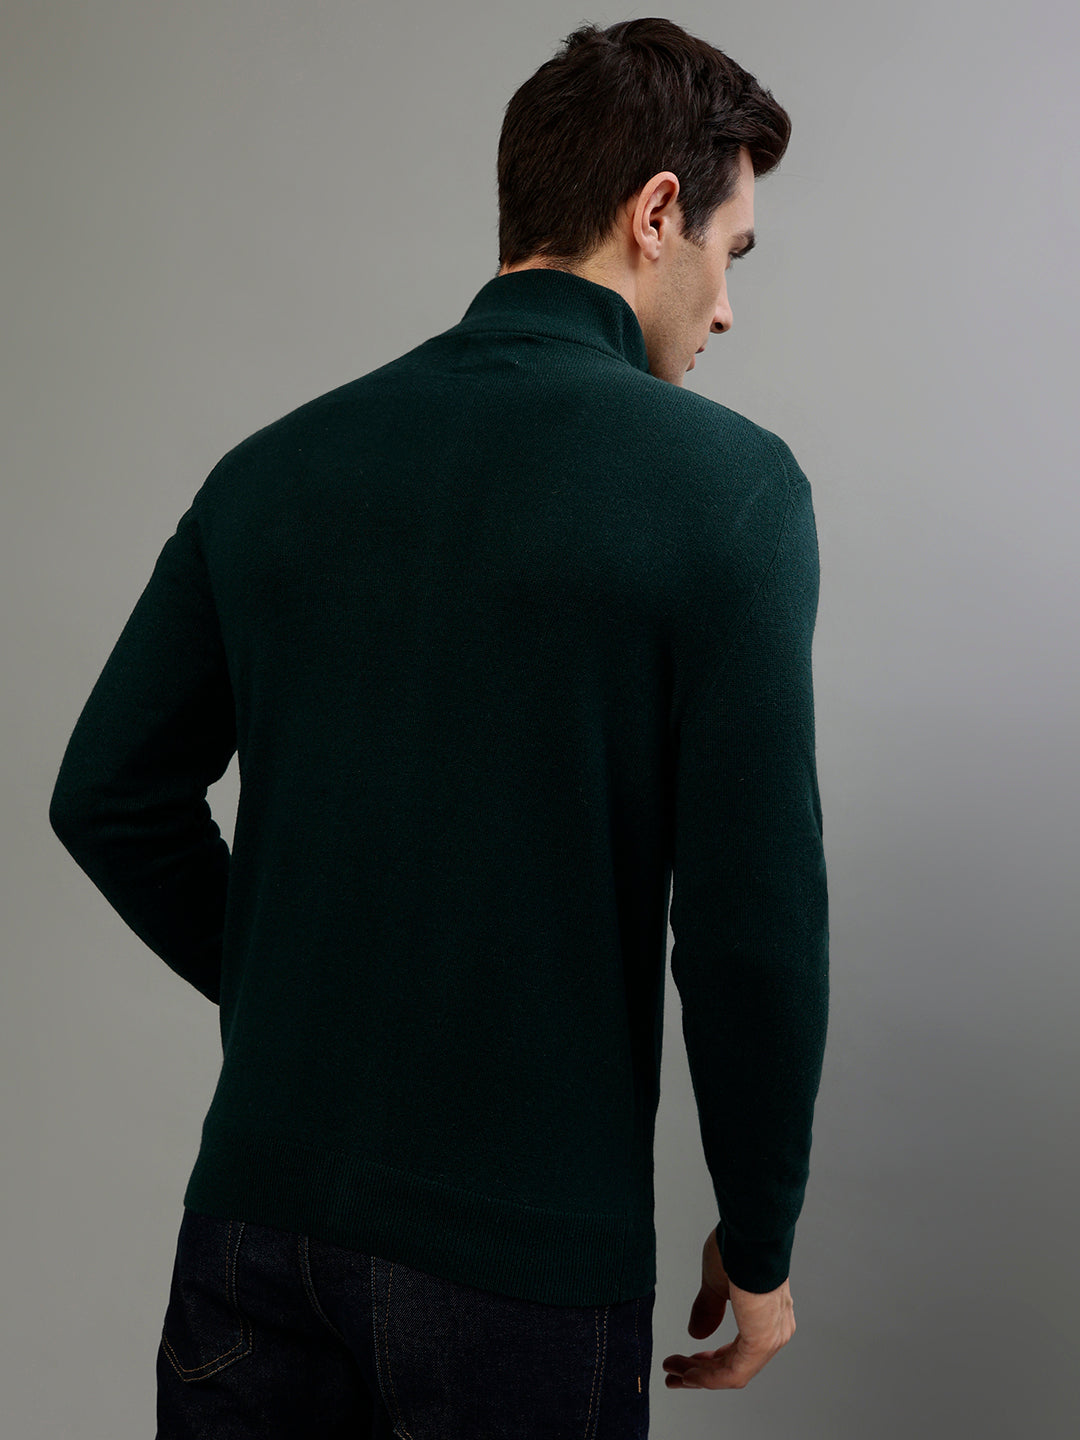 Shop Gant Solid Green High Neck Full Sleeve Sweater